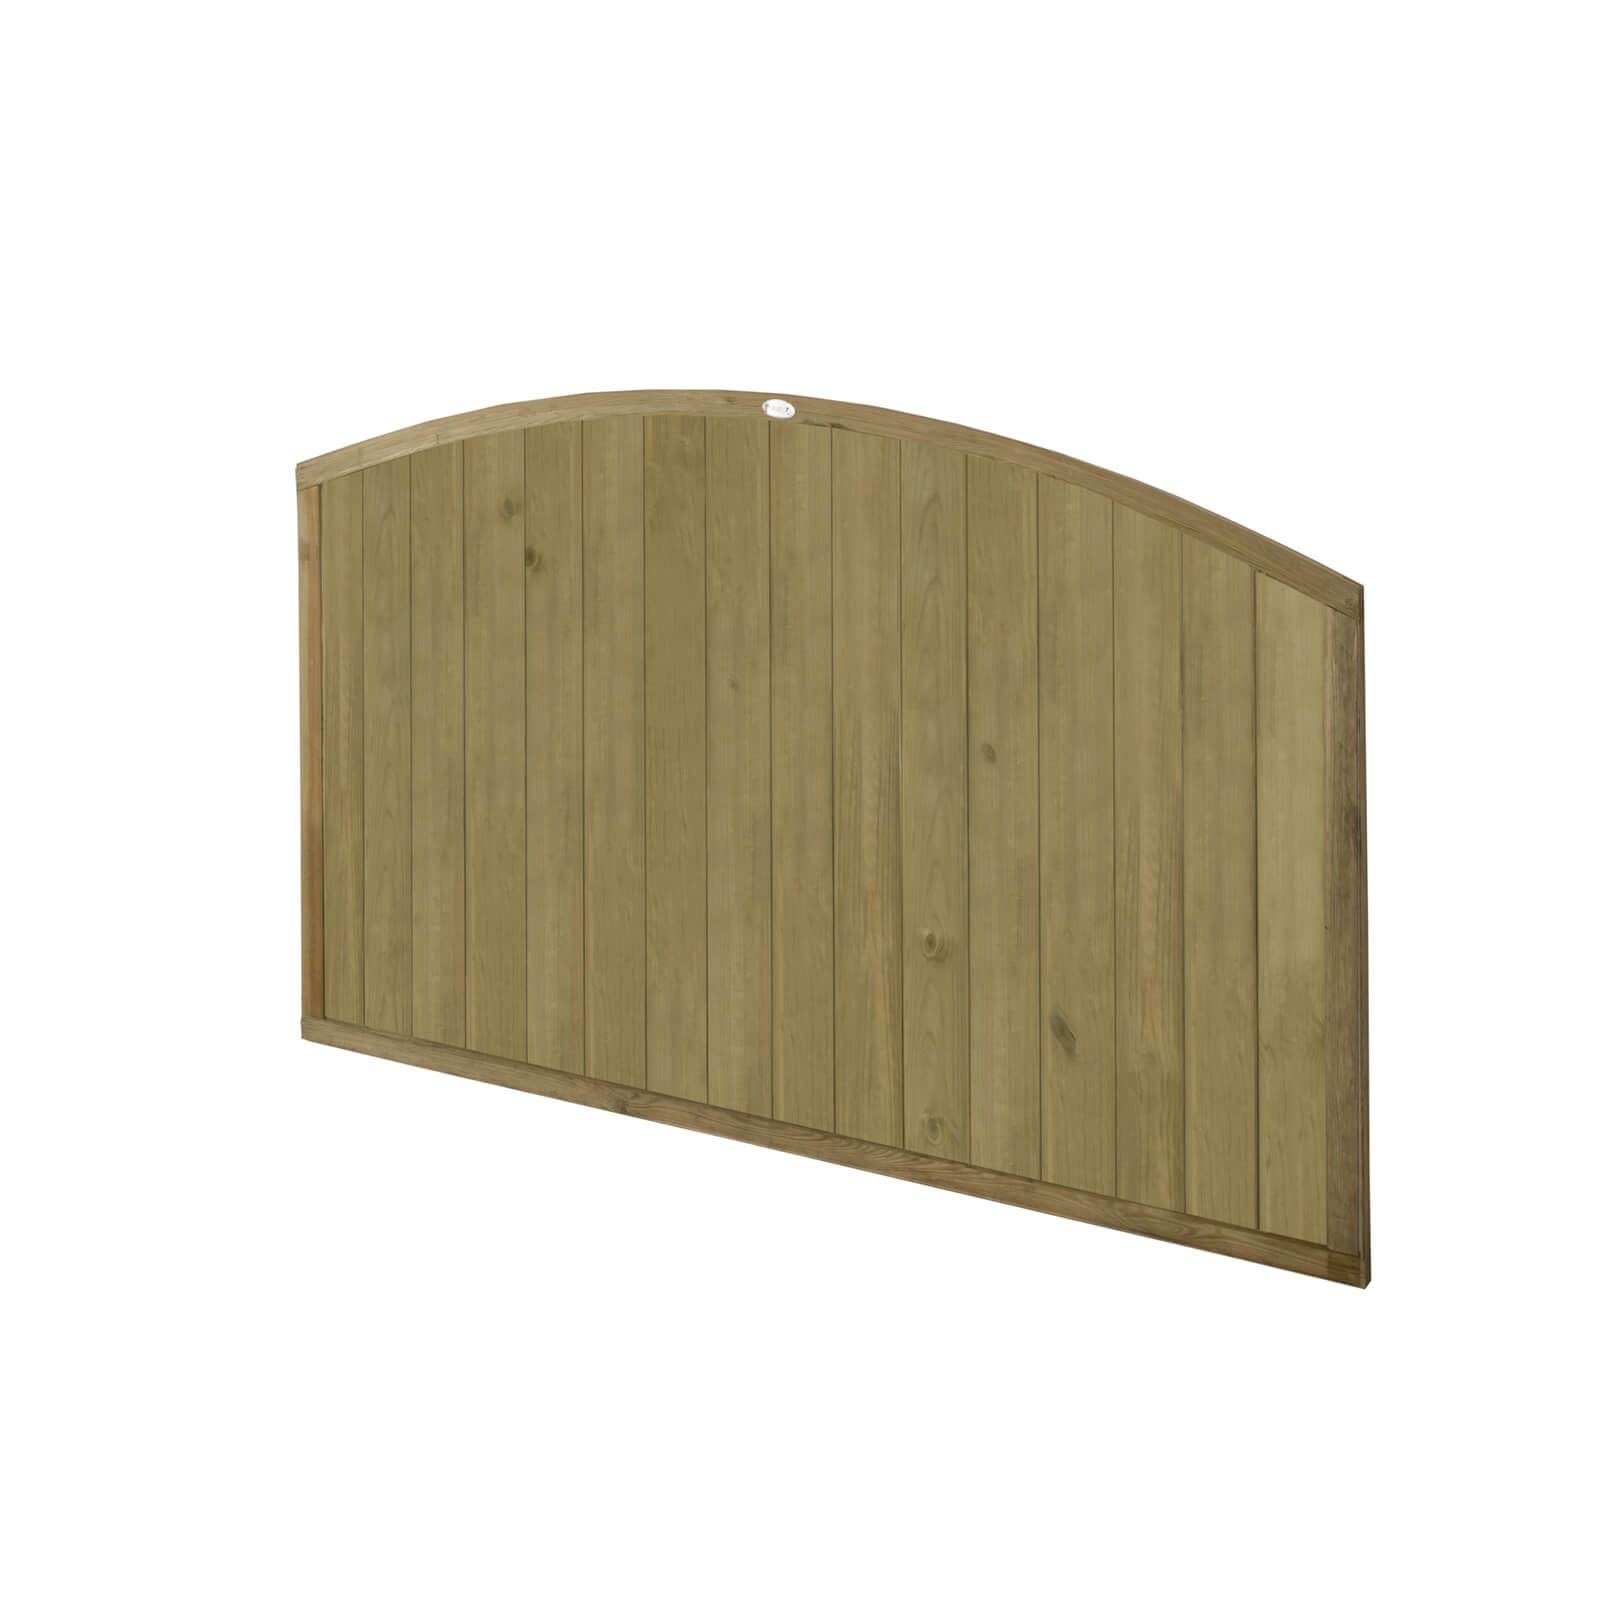 Forest Dome Tongue and Groove Panel - 4ft - Pack of 4